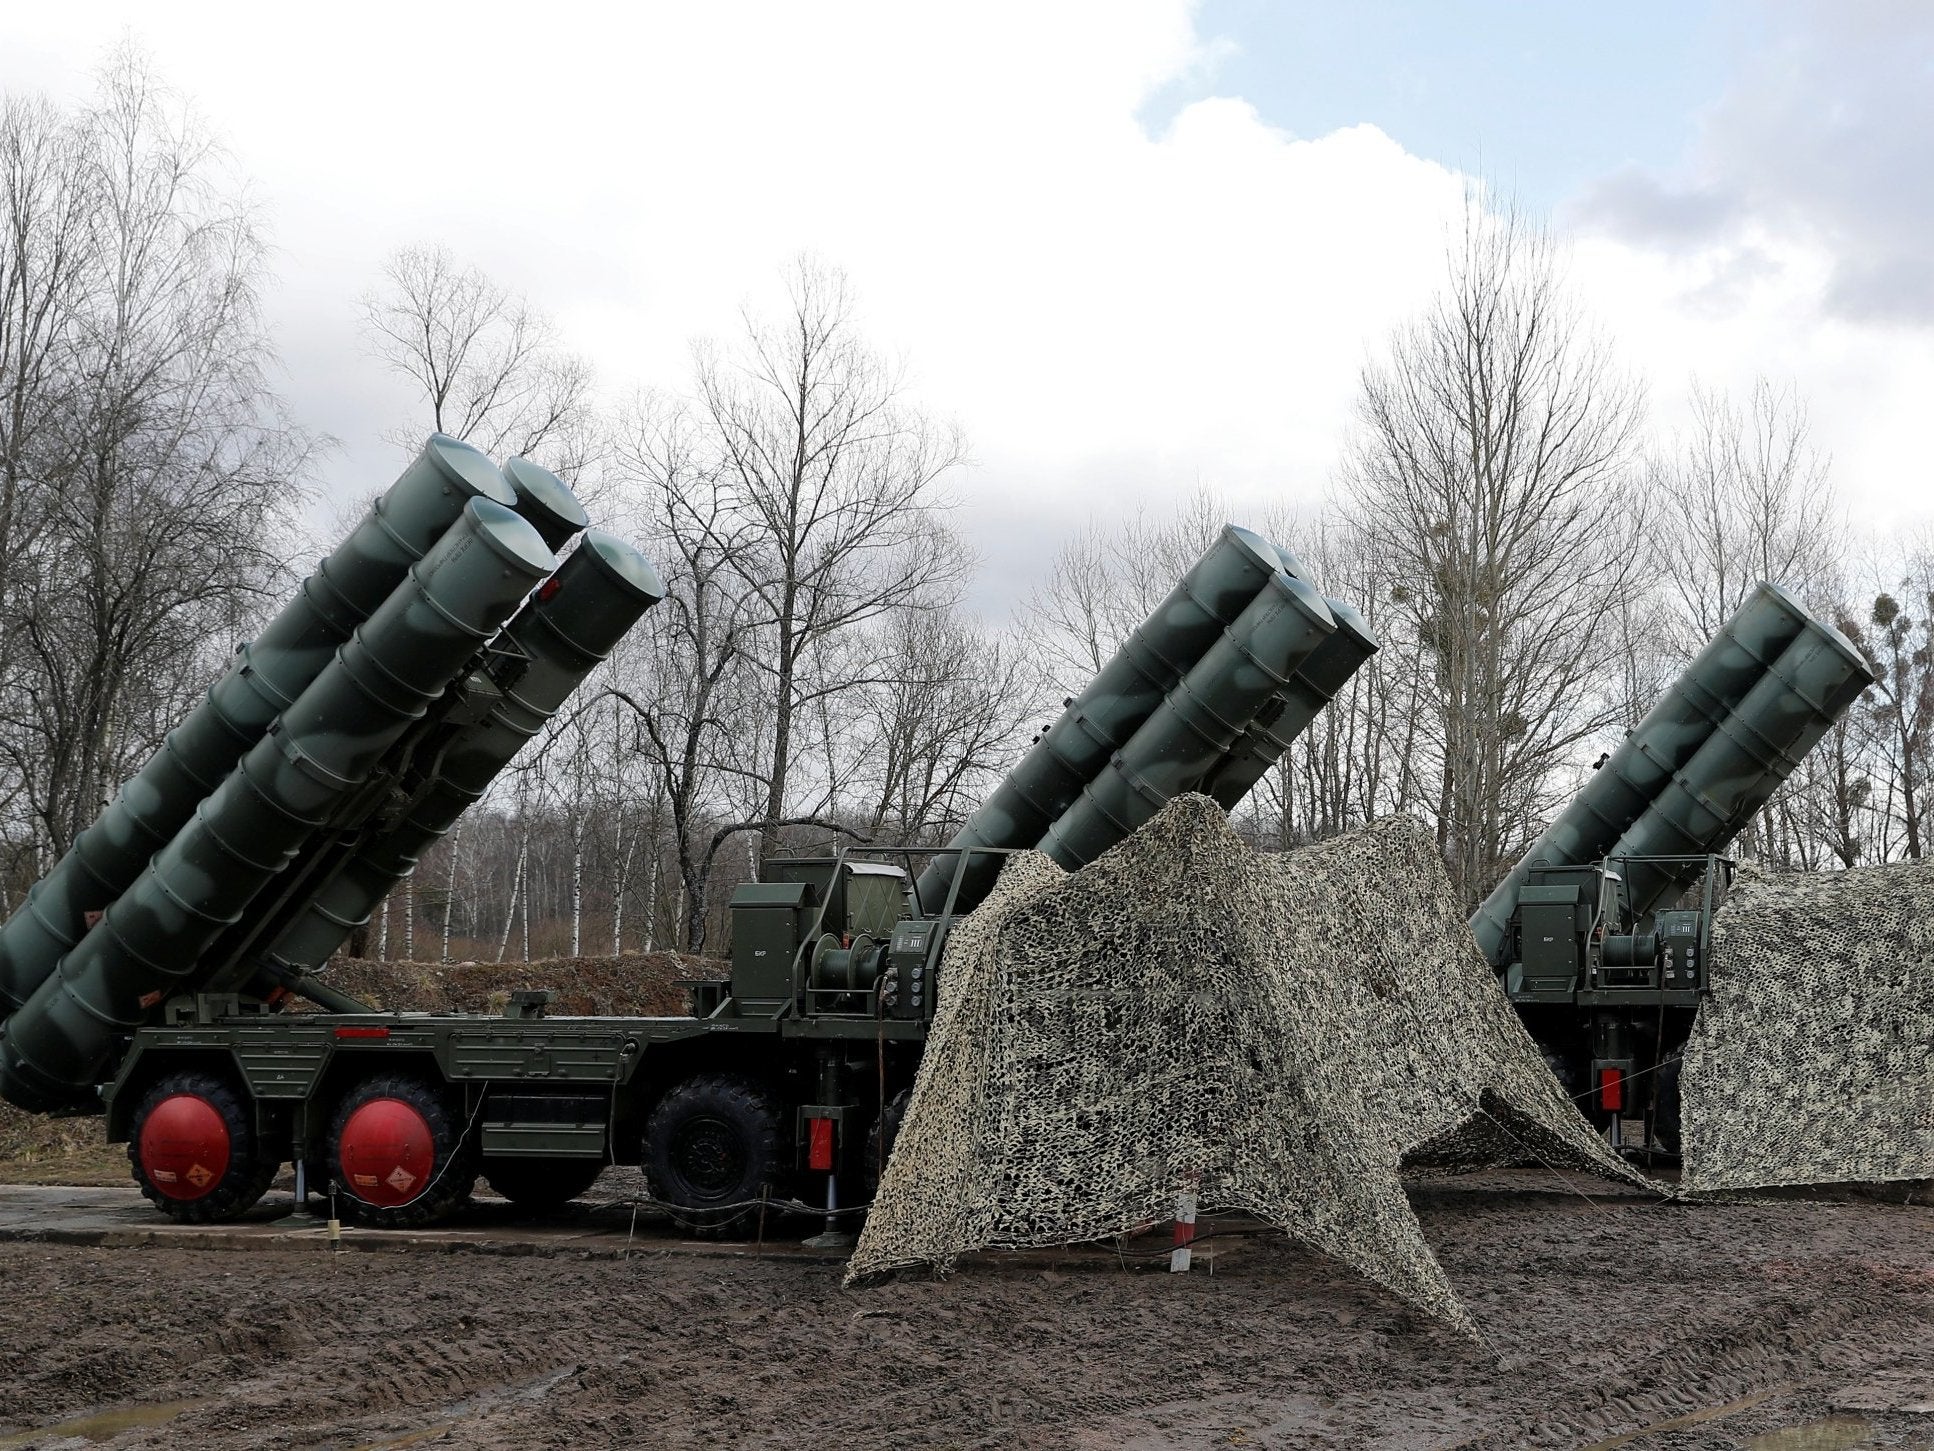 Washington fears the Russian S-400 missile system would compromise the security of its F-35 fighter jets.